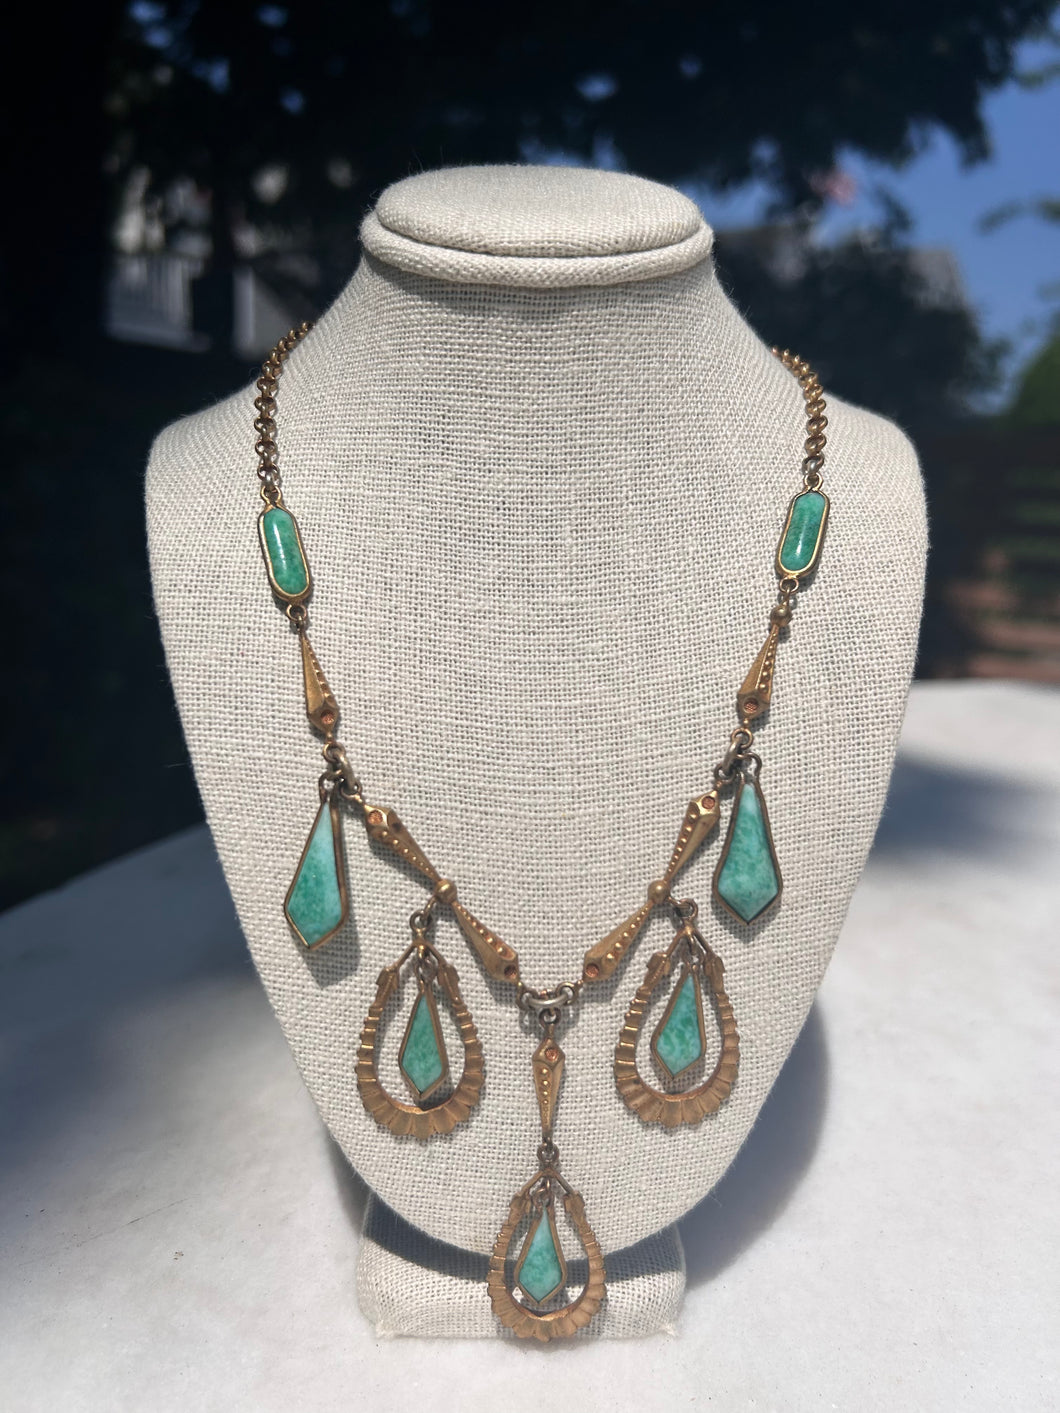 Vintage Bronze Necklace with Turquoise Teardrops